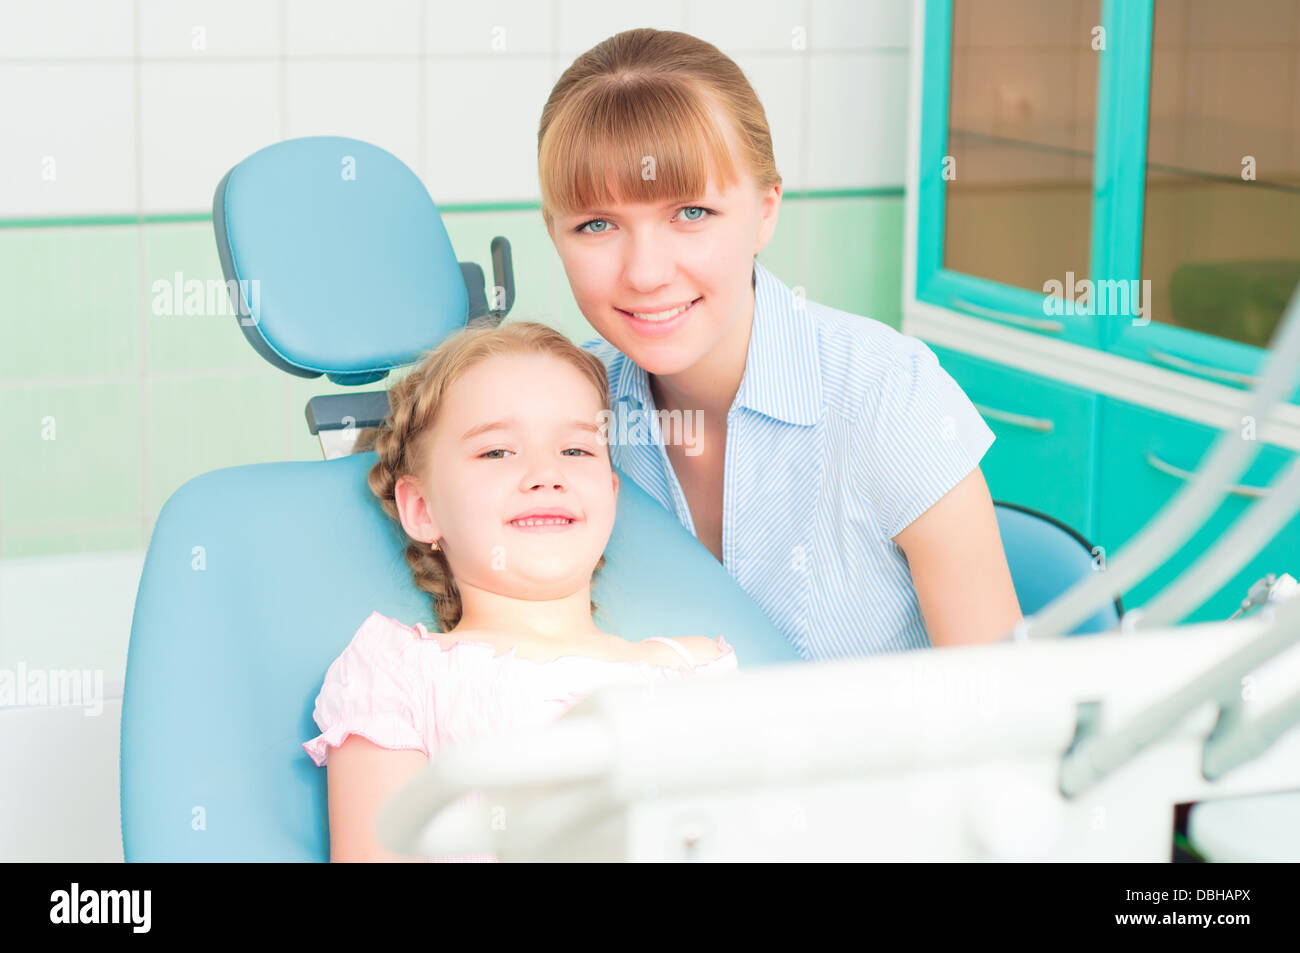 1 800 dentist mother and daughter at kitchen table commercial